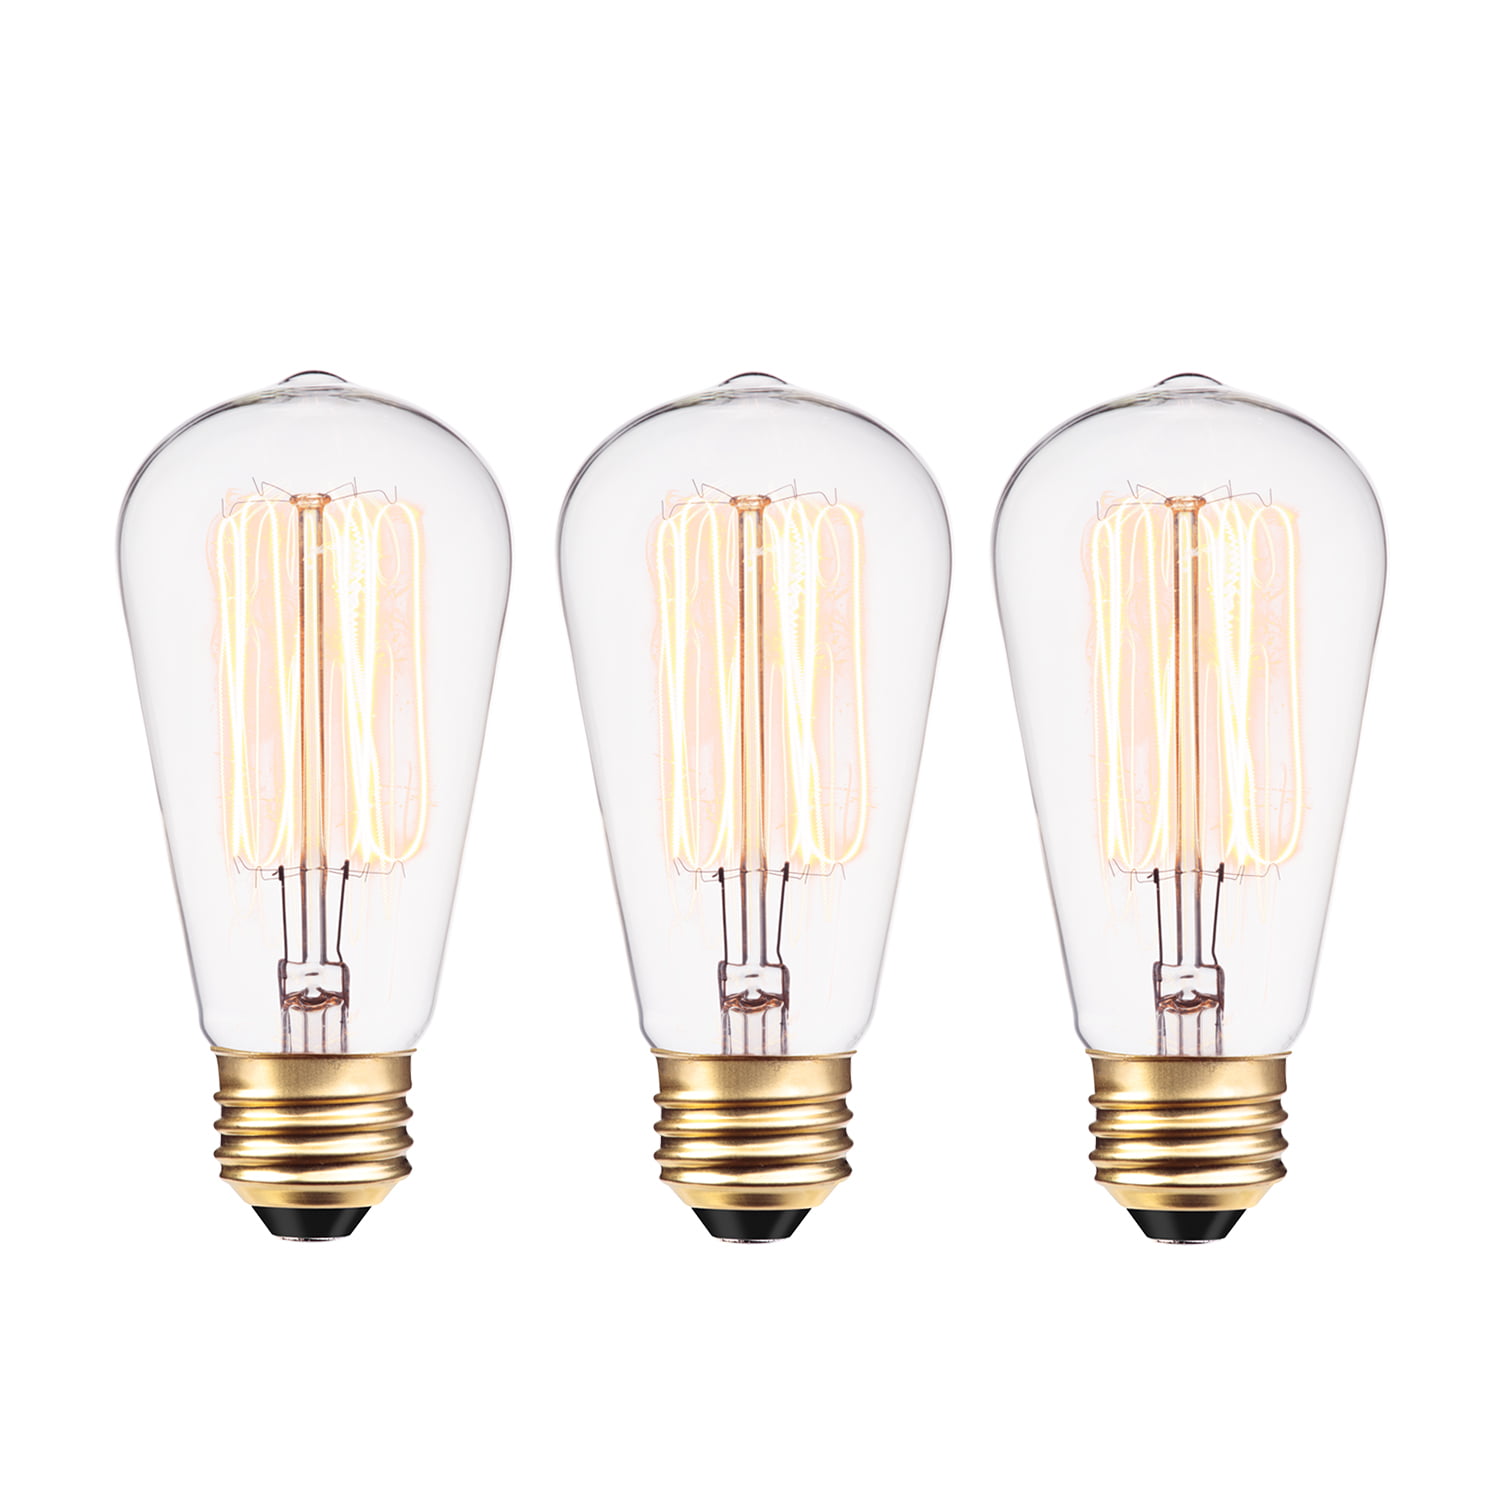 70 Lumens 110~130 Volts 6 Pack Renewed Rolay 25 Watt Vintage Edison Light Bulb with Squirrel Cage Filament E26 Base